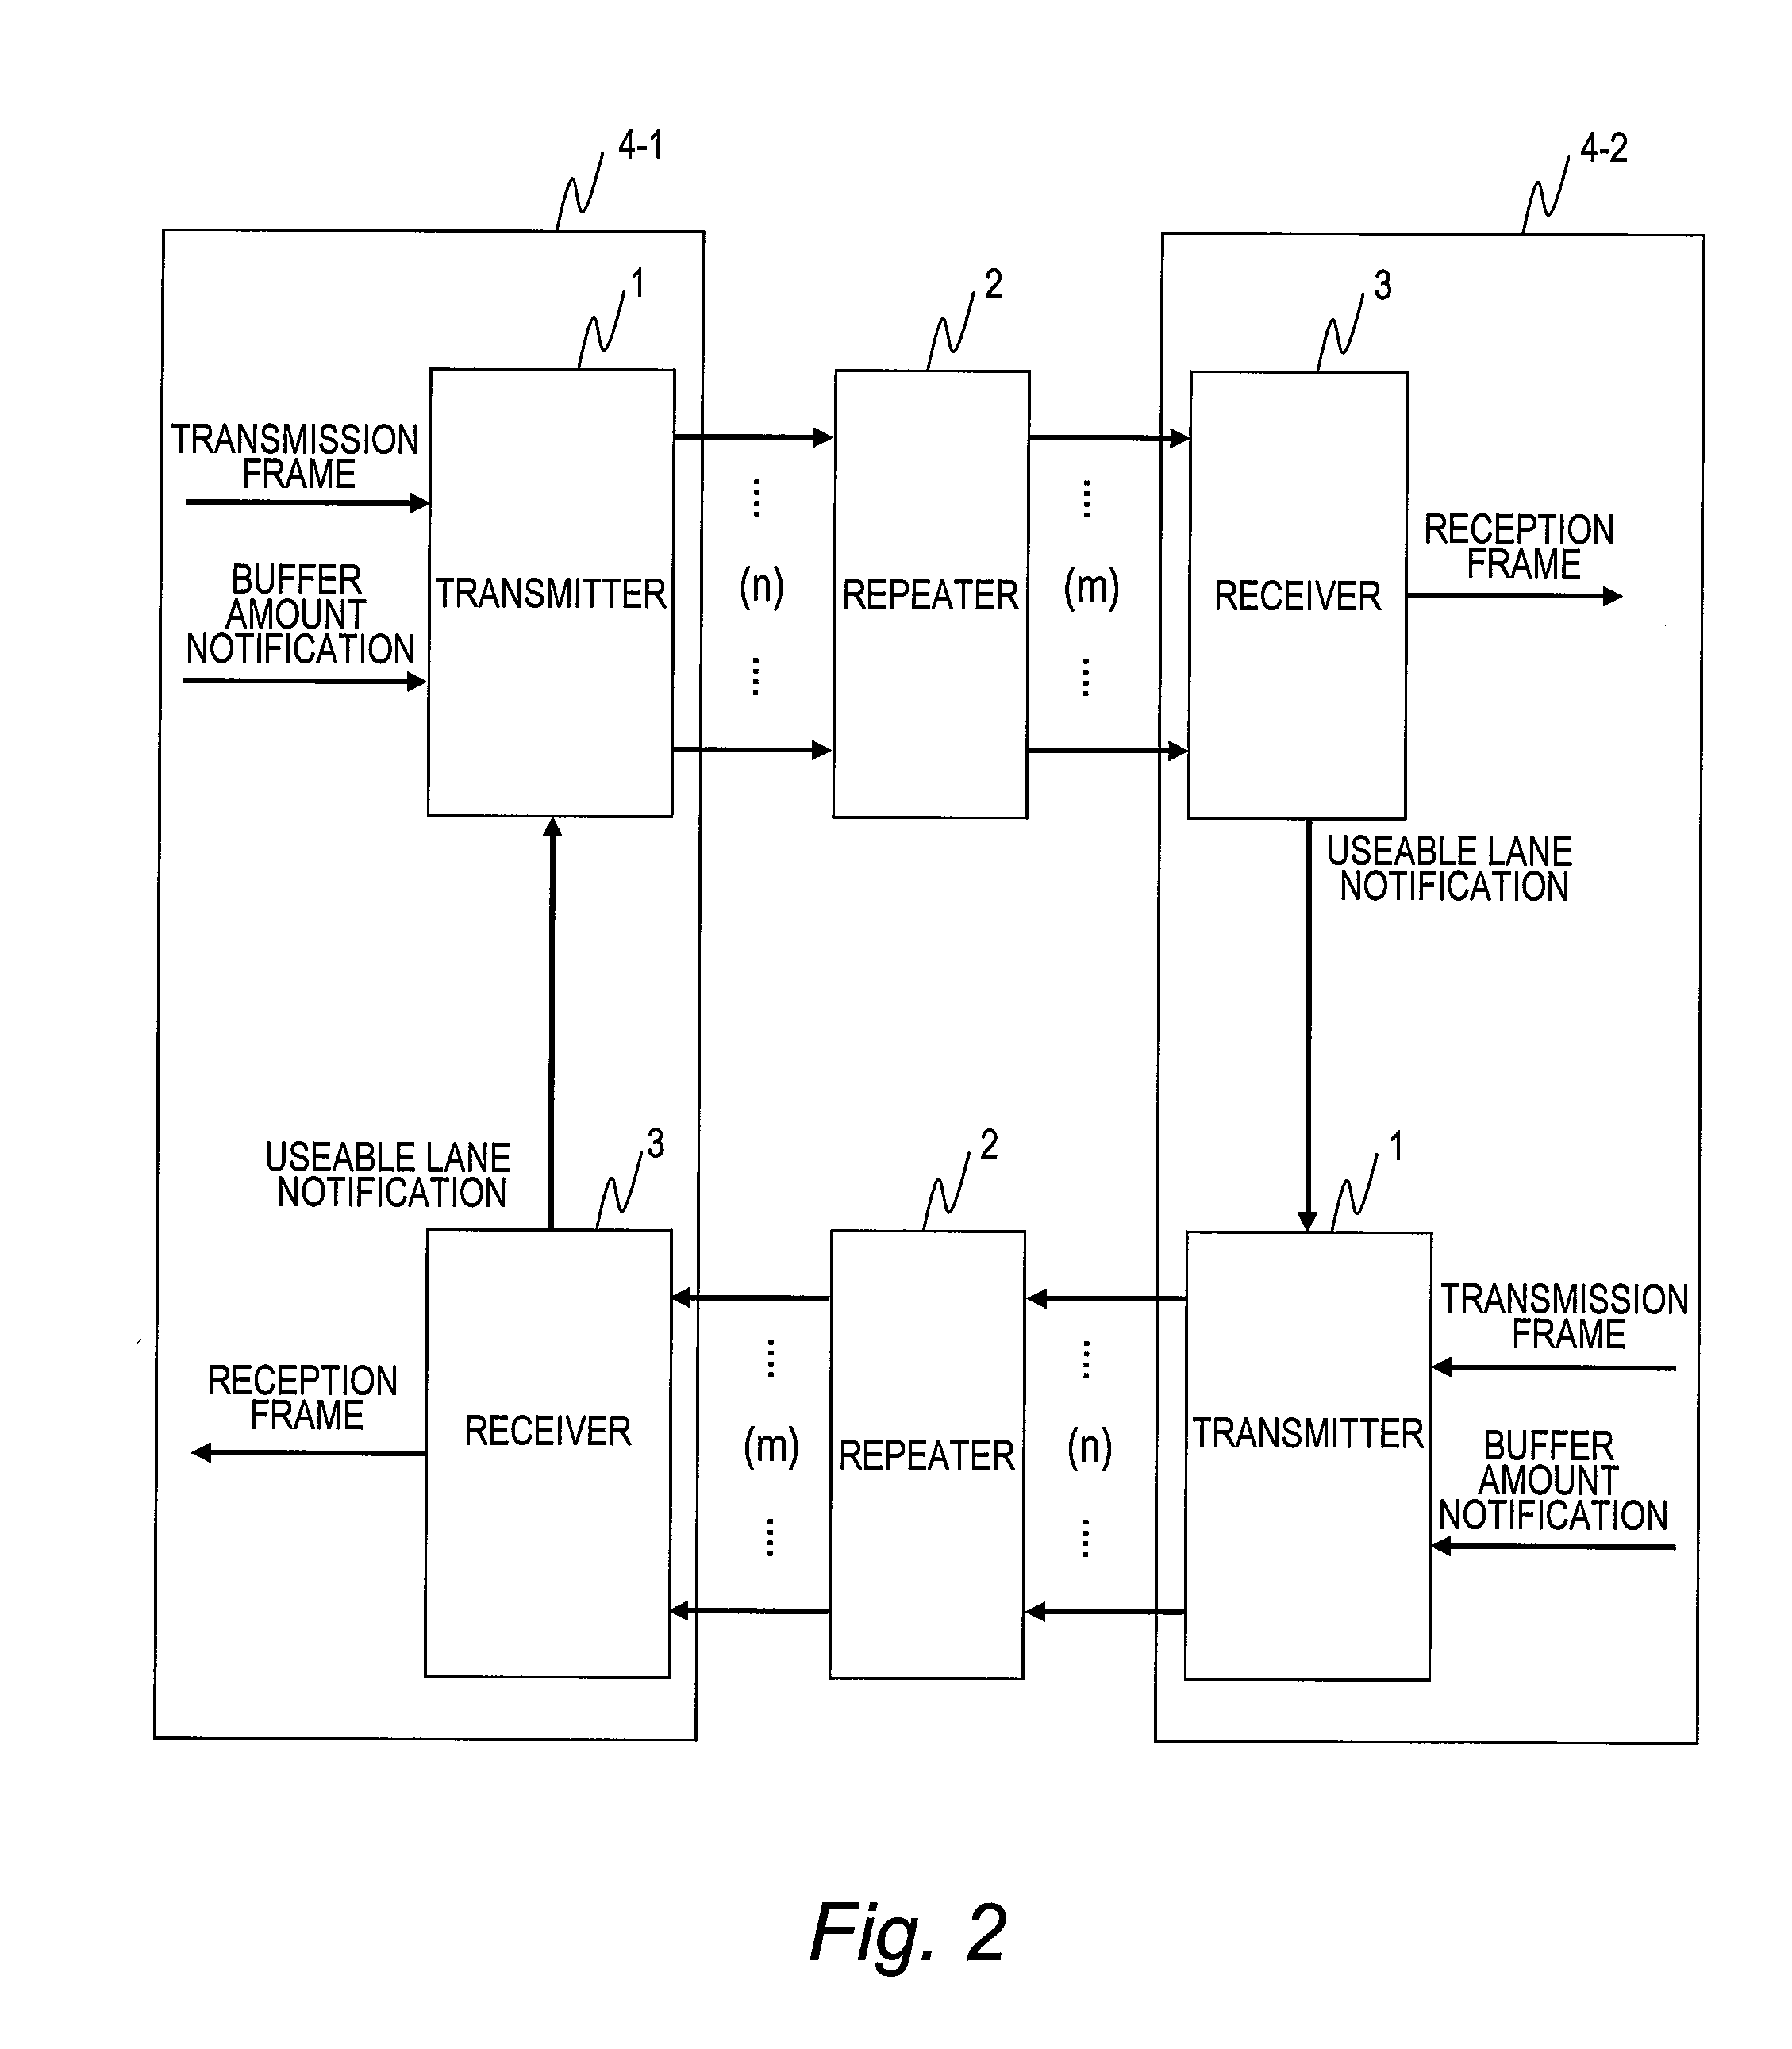 Transmission system, repeater and receiver